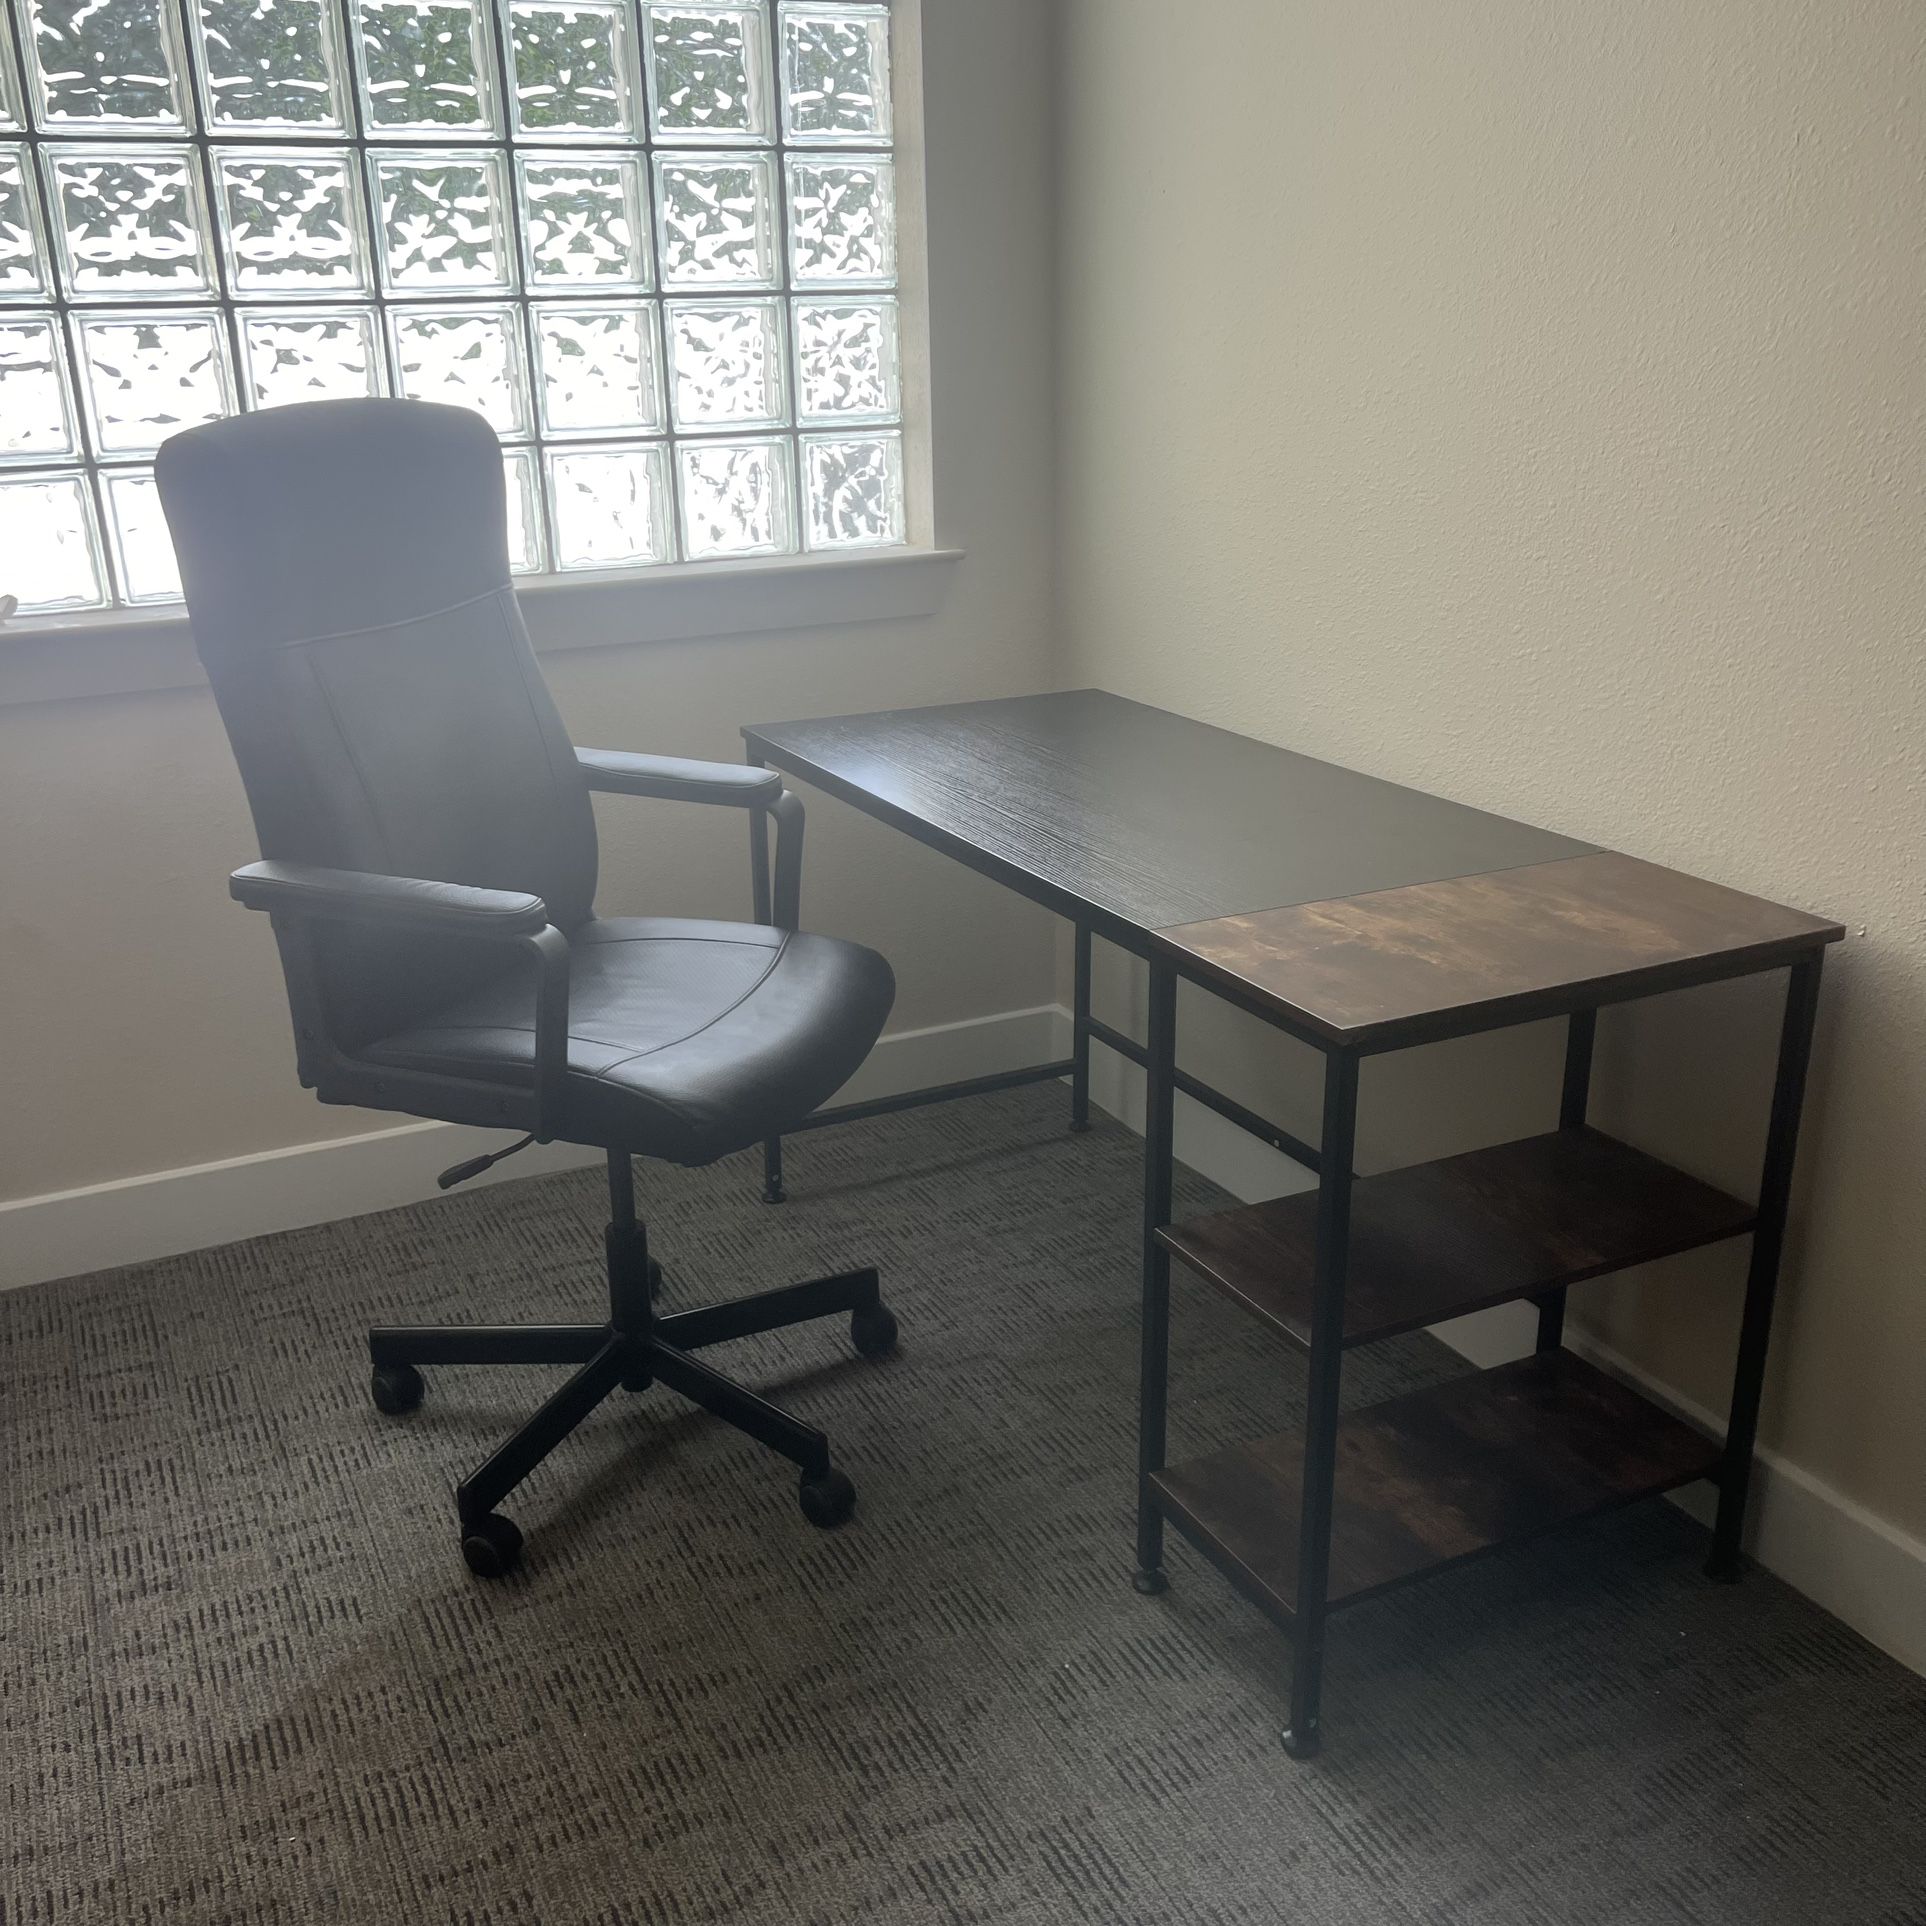 Large Wide Desk 55 x 24 x 30 (retails $100) and Ikea MILLBERGET Chair (retails $90) Set *Durm 27705